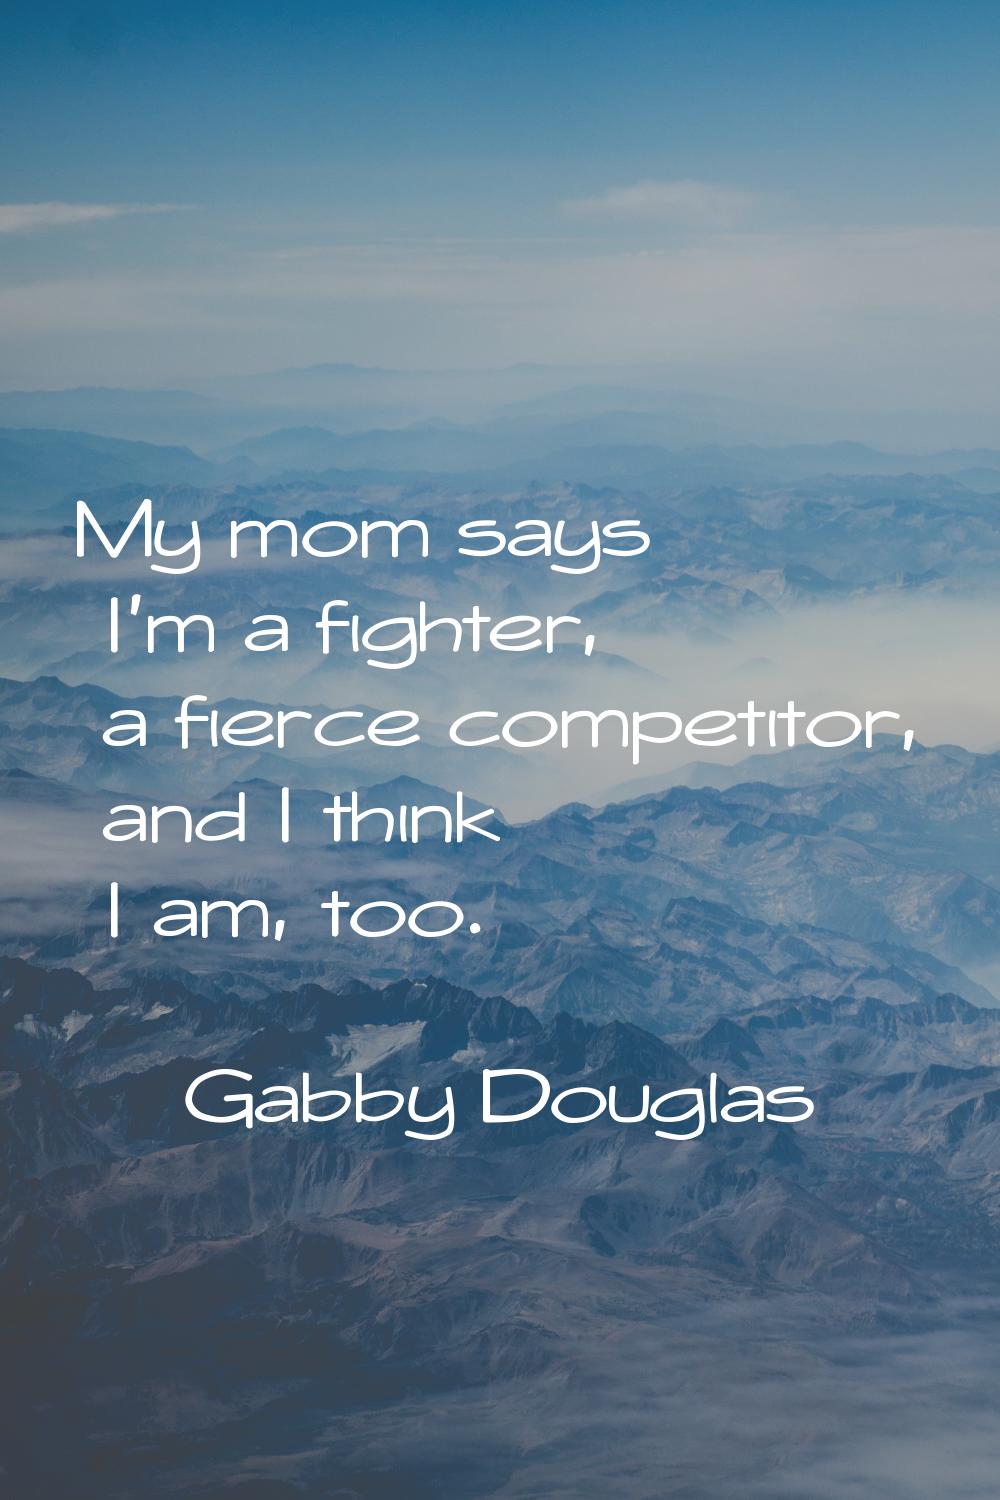 My mom says I'm a fighter, a fierce competitor, and I think I am, too.